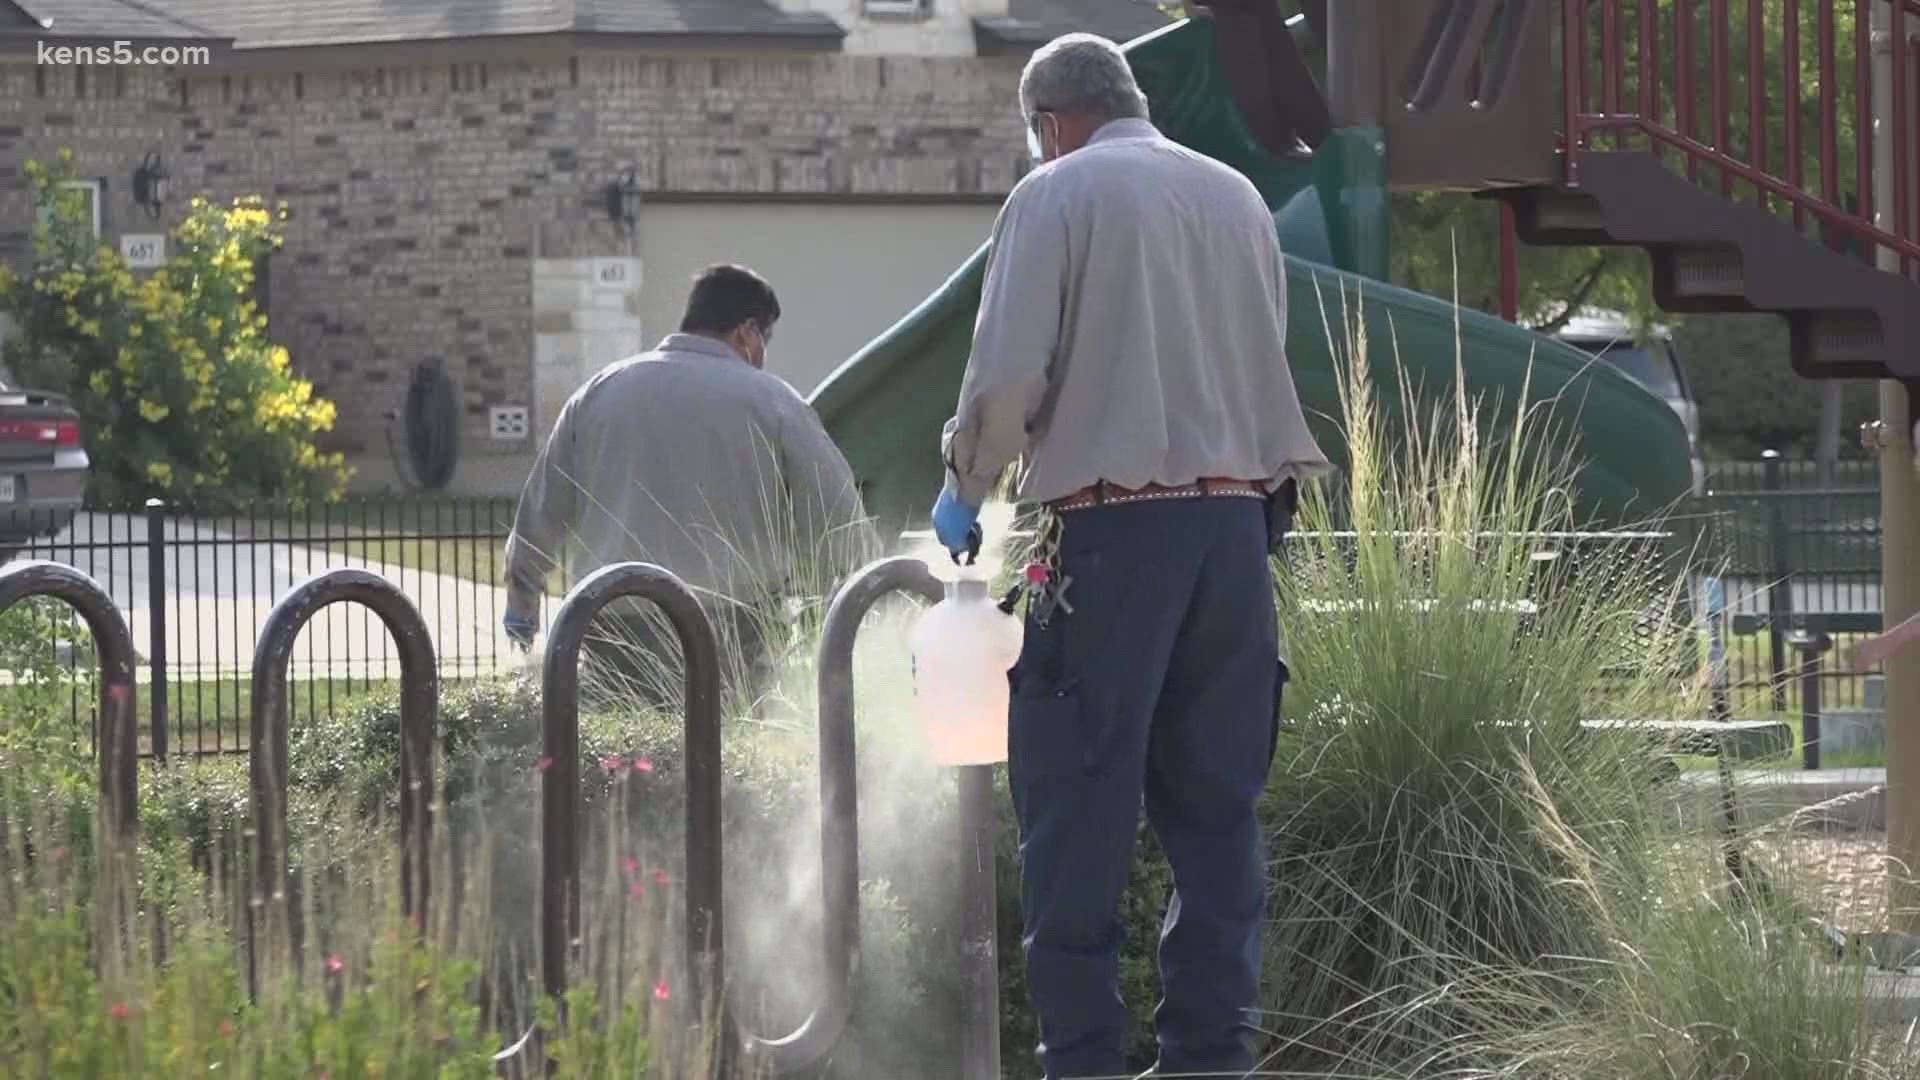 The coronavirus pandemic has ingrained new cleaning practices in all of us. We introduce you to the crews making sure city parks are ready for families to enjoy.